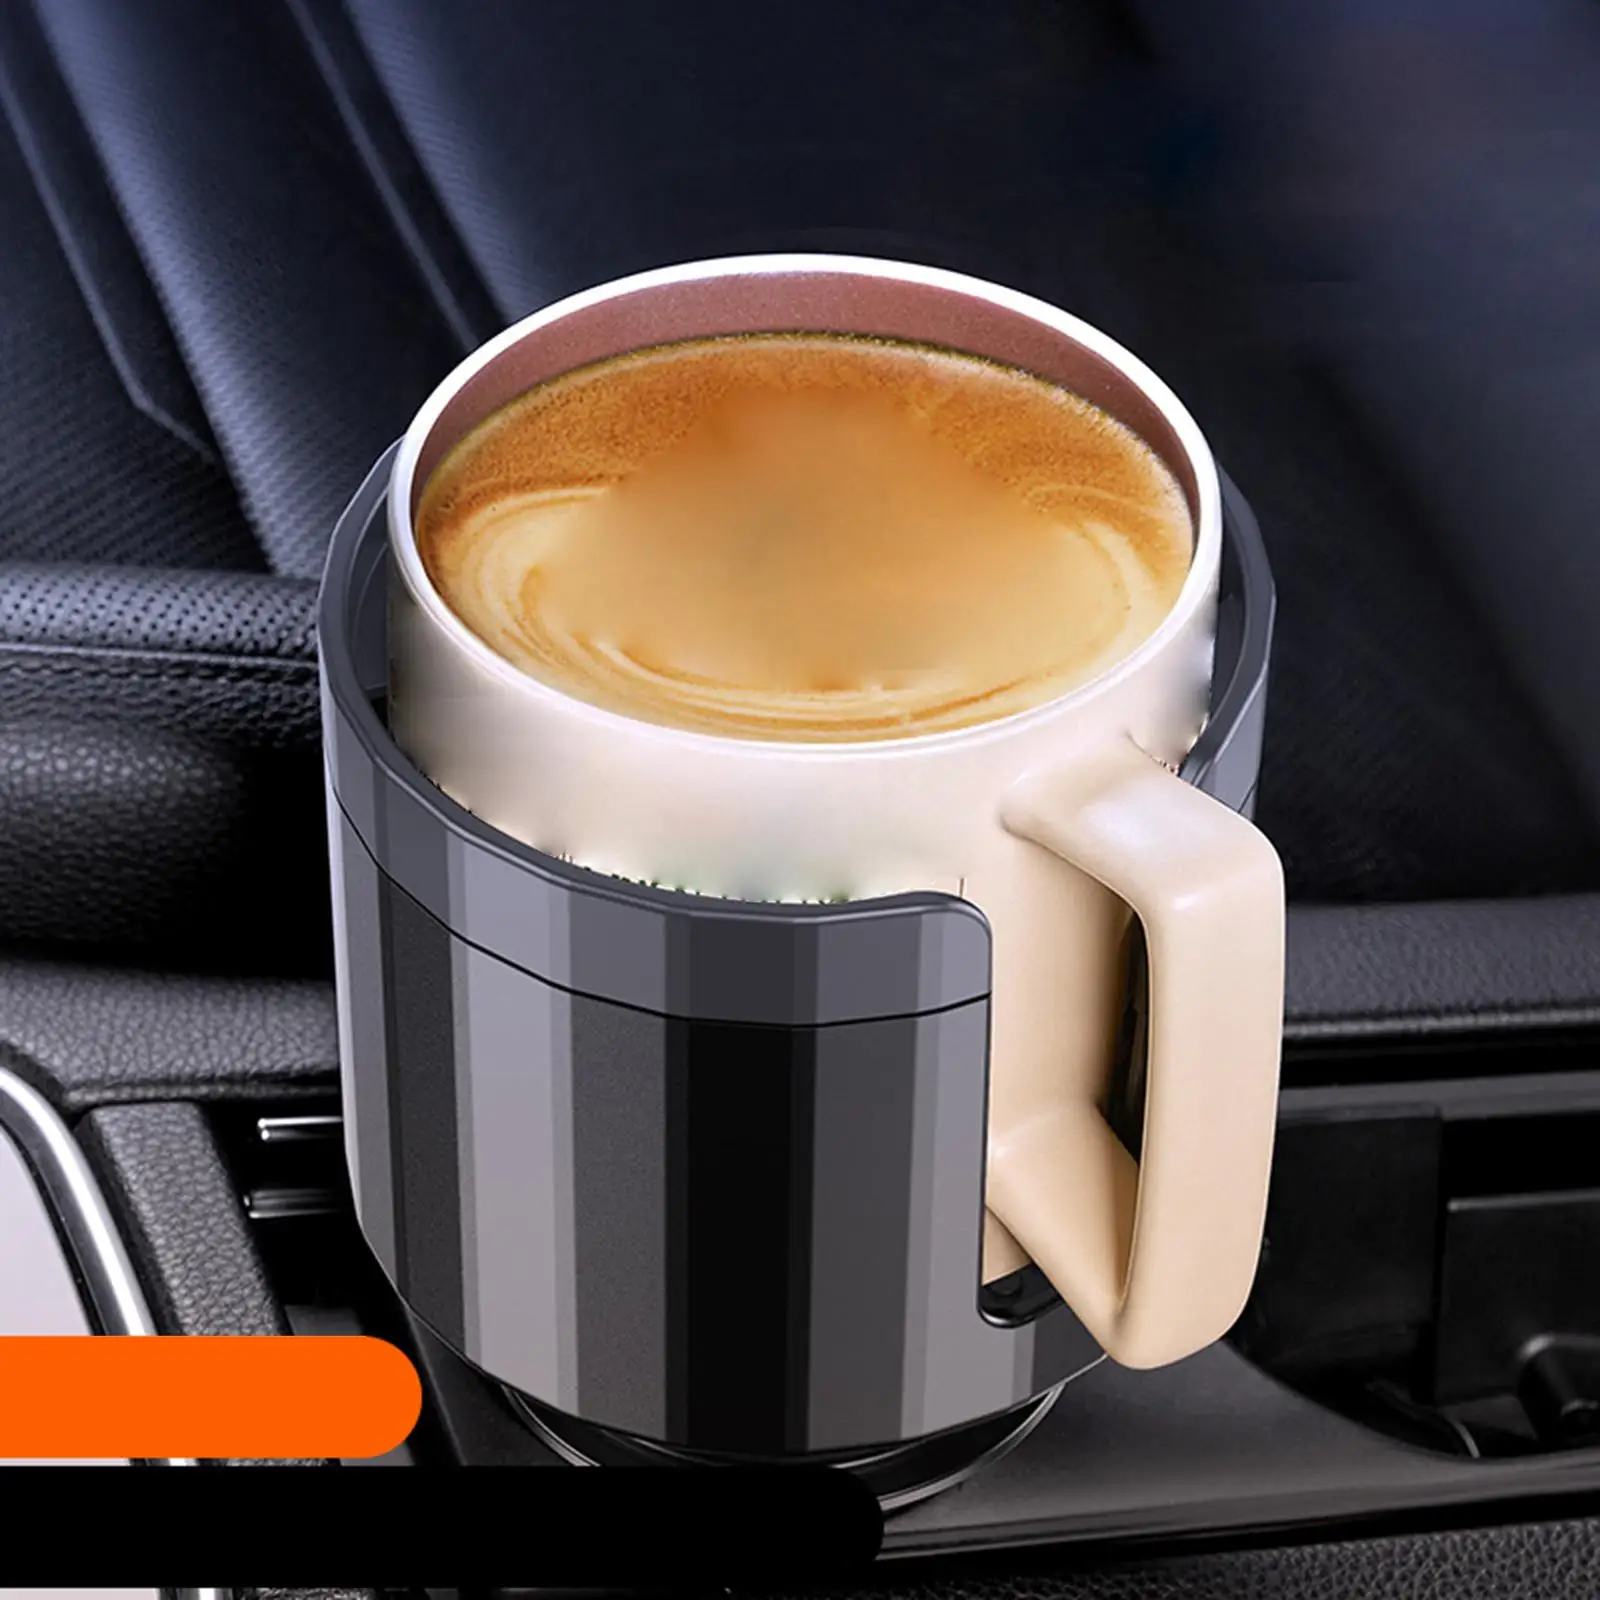 Car Cup Holder Expander Adapter Cup Holder Insert Car Water Drink Holder Water